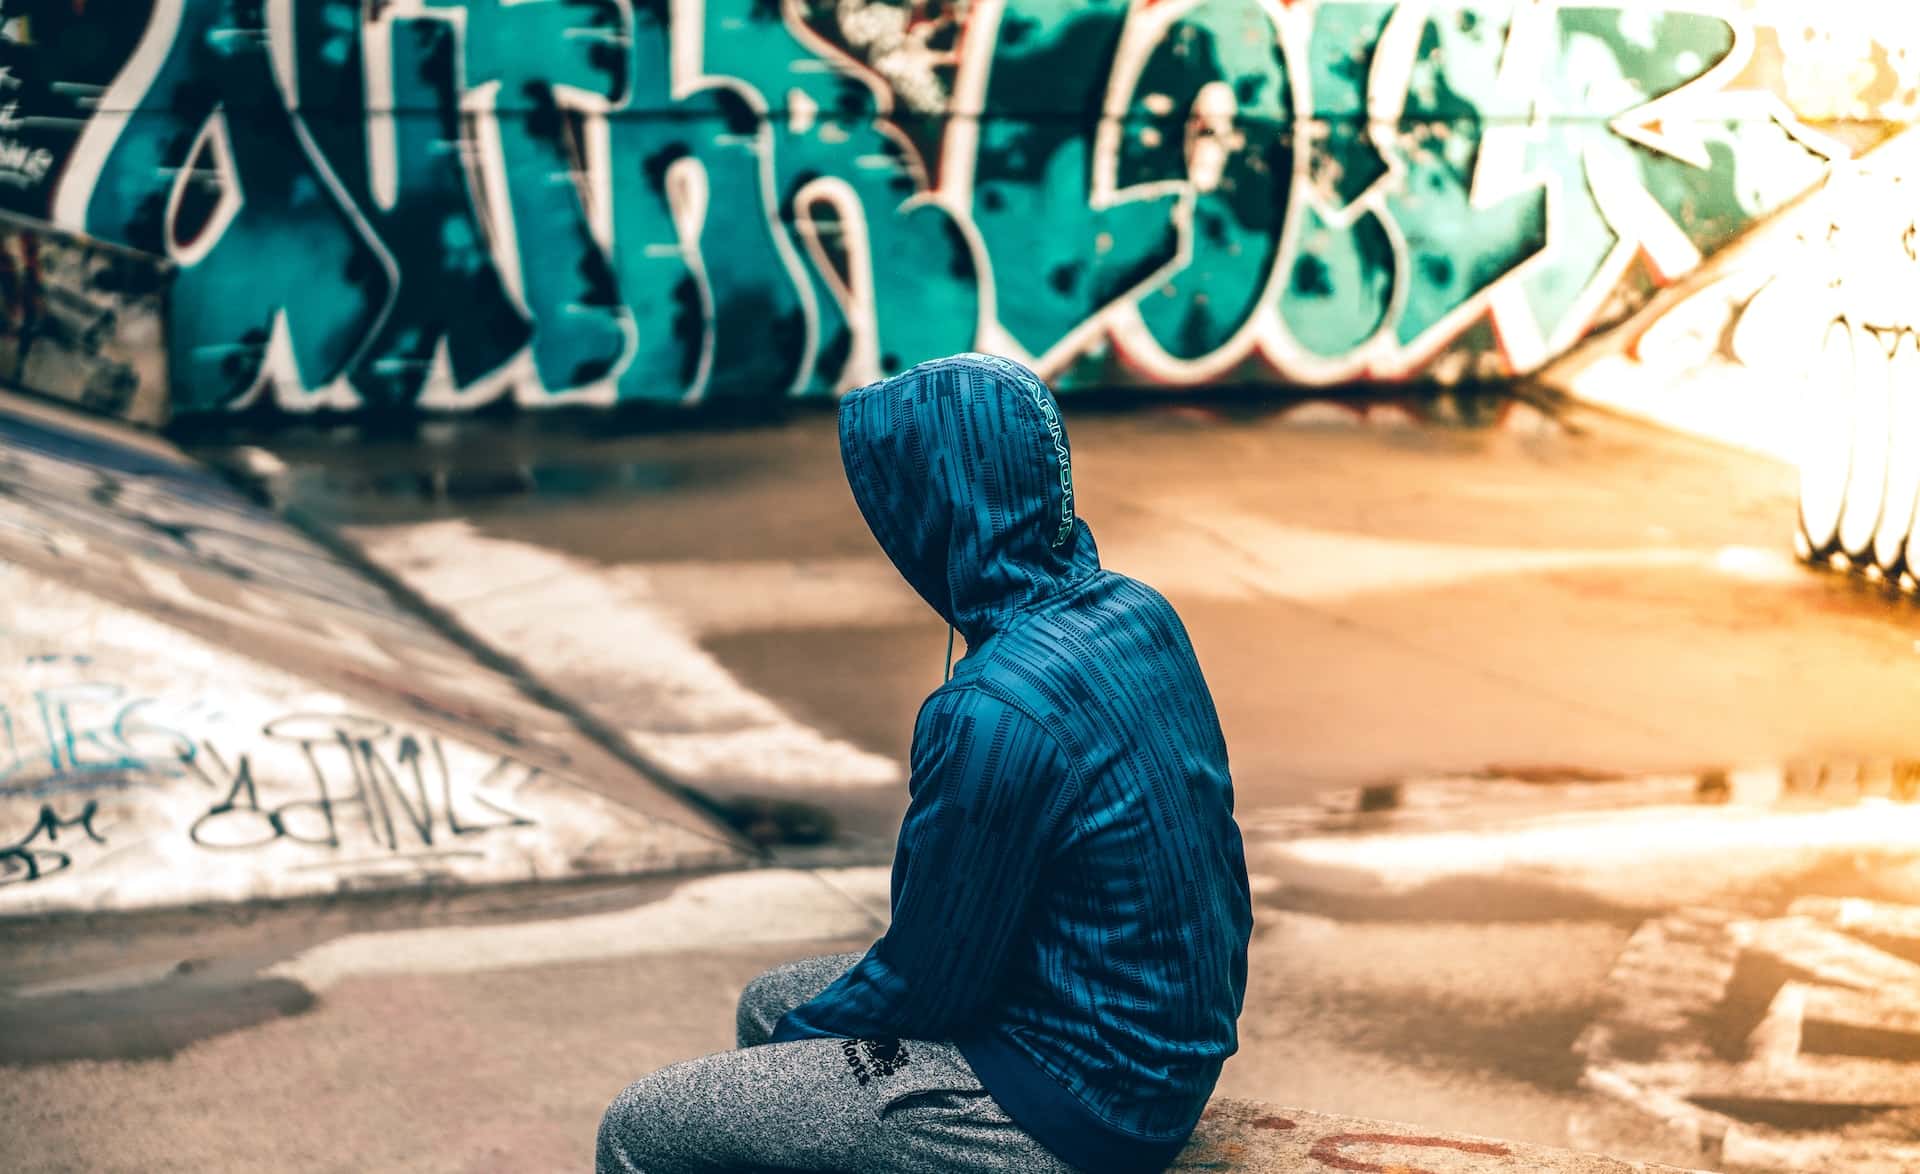 teen sitting in front of graffiti -cases for juvenile court